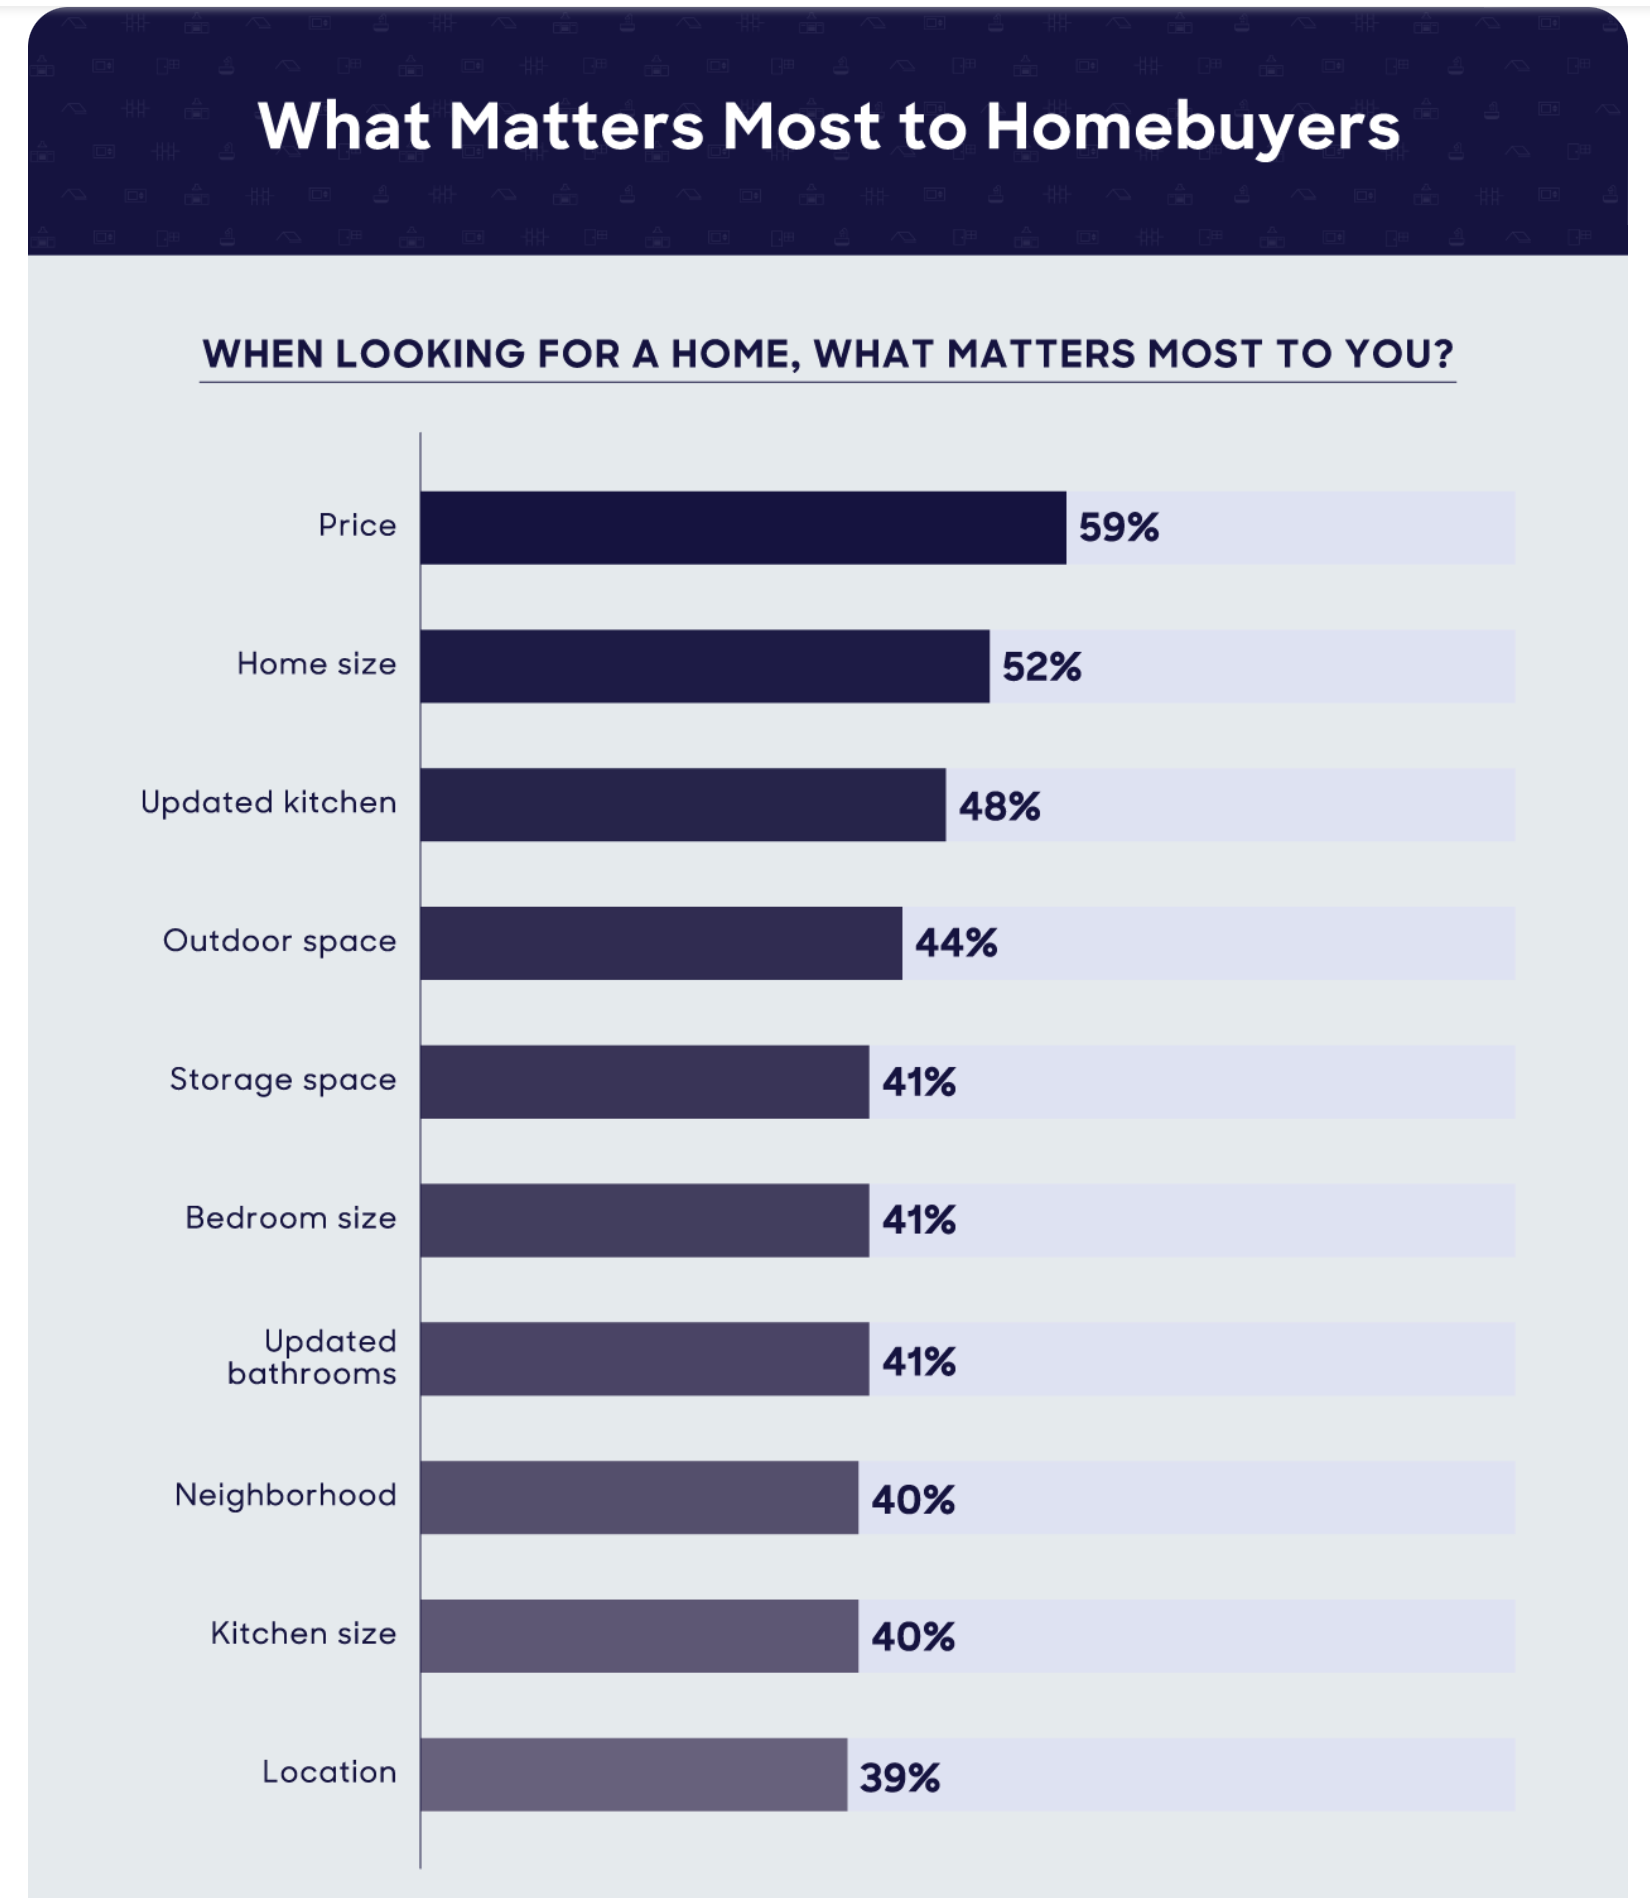 A list of things that matter most to home buyers when looking for a home.